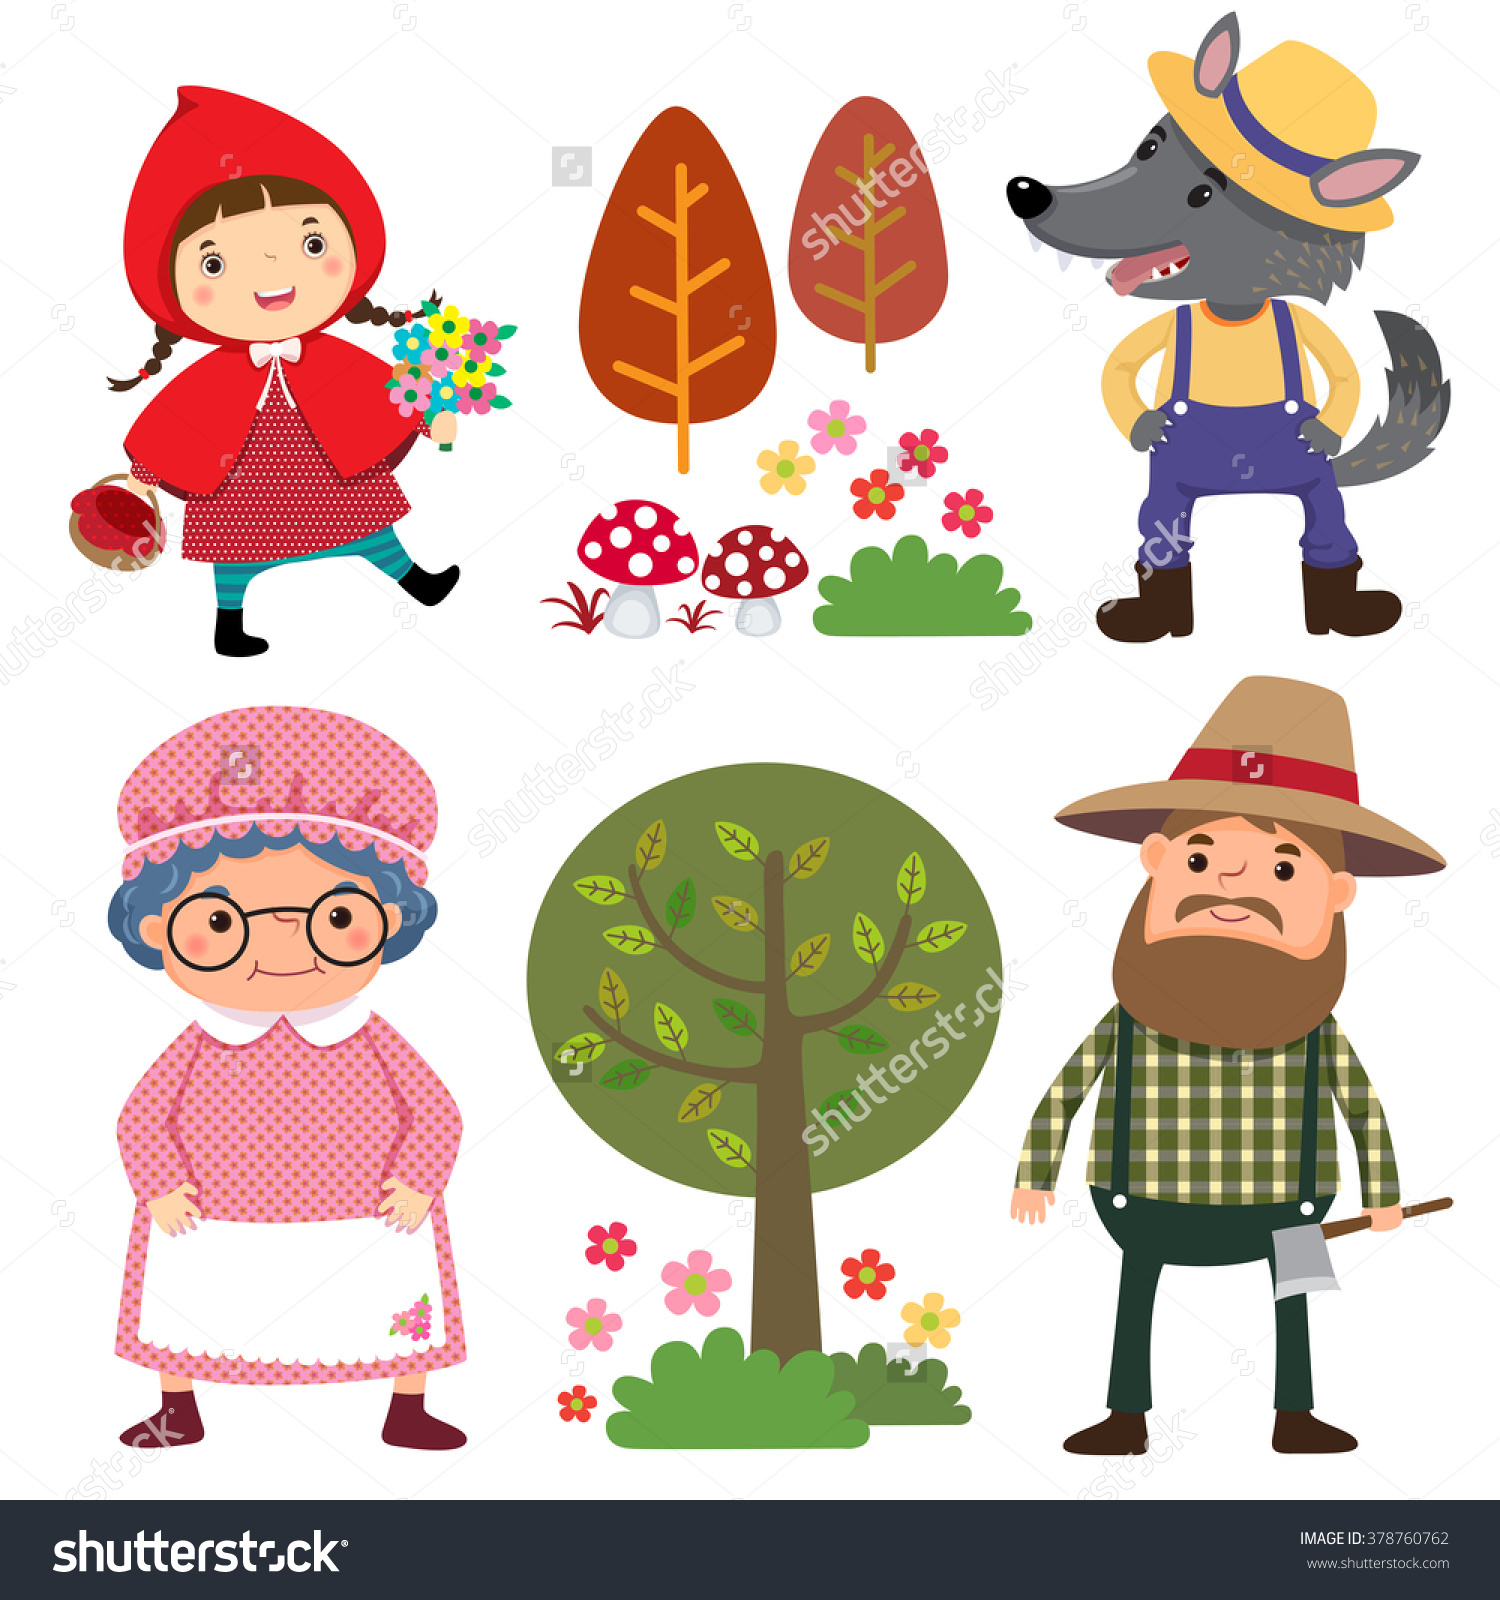 Red Riding Hood Clipart - Cli